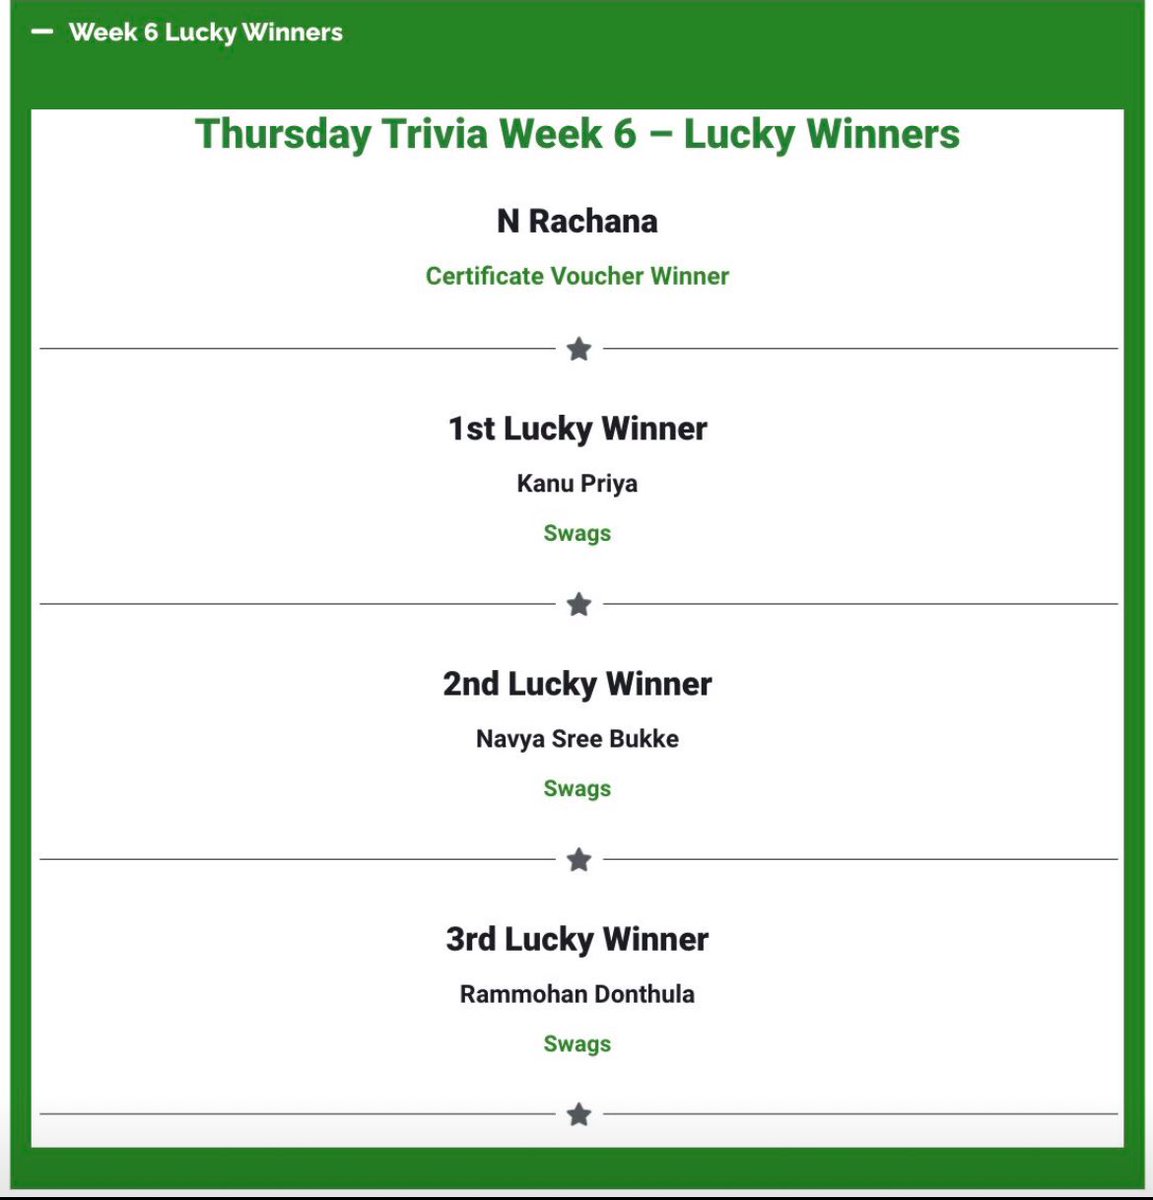 Winners for the 𝗧𝗵𝘂𝗿𝘀𝗱𝗮𝘆 𝗧𝗿𝗶𝘃𝗶𝗮 𝗪𝗲𝗲𝗸 6 contest are finally out !! Checkout the Thursday Trivia Leaderboard here👇 lnkd.in/dG7zJdWj More details👇 linkedin.com/posts/bengalur… #BengaluruDreamin24 #Salesforce #trailblazercommunity #ThursdayTrivia